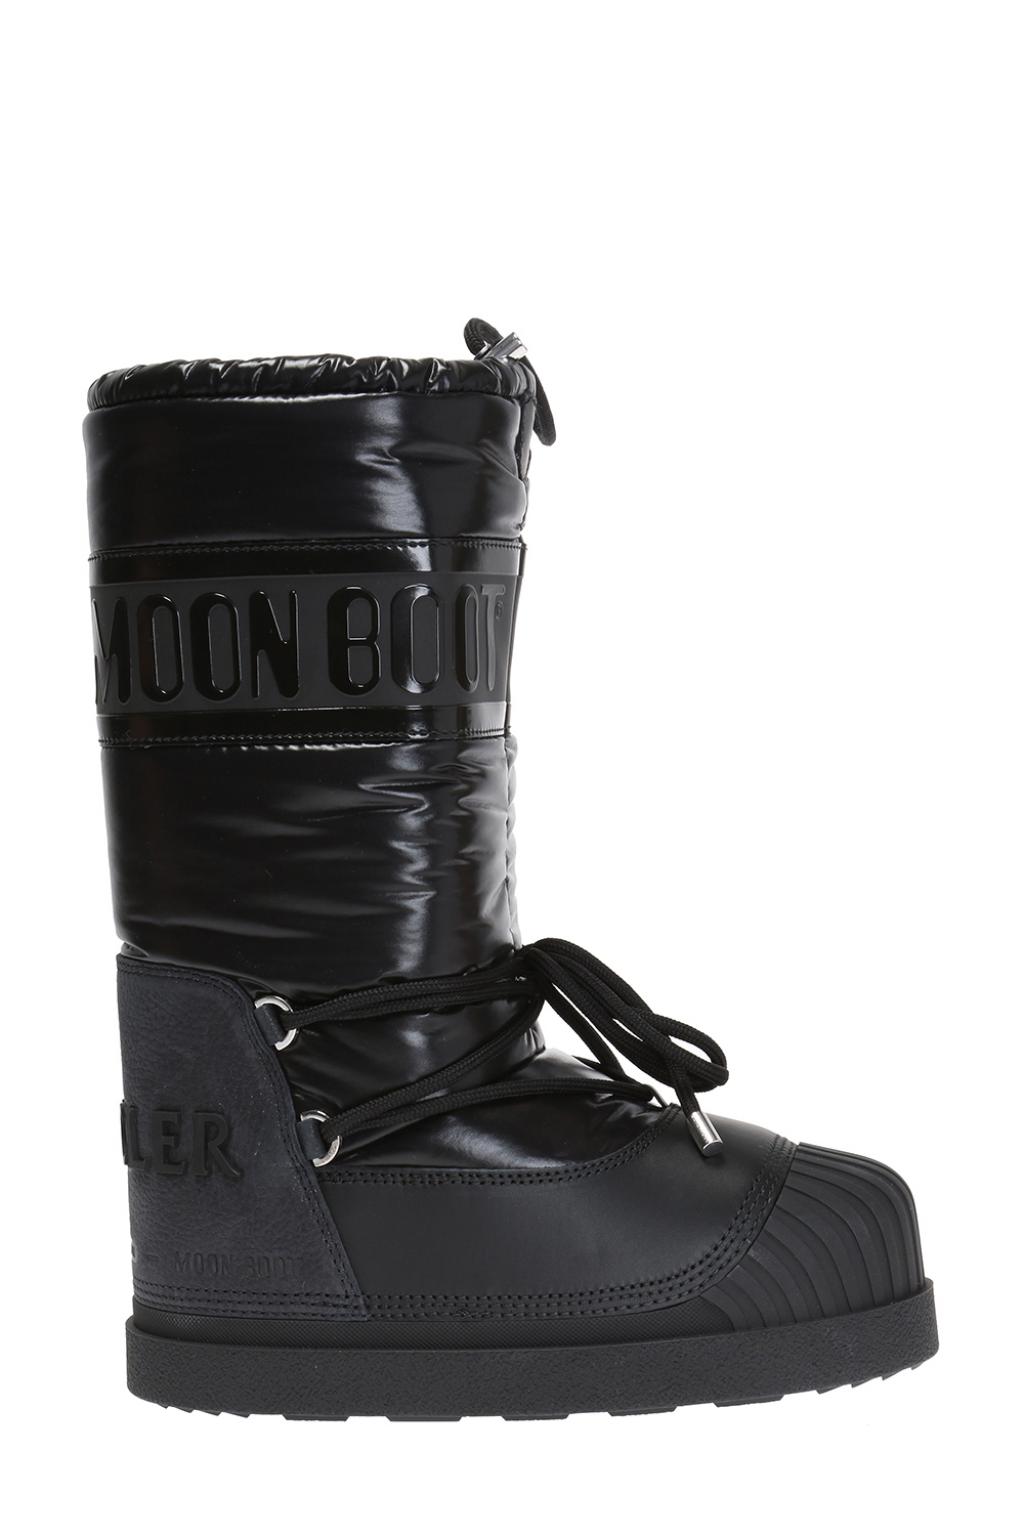 moncler boots moon